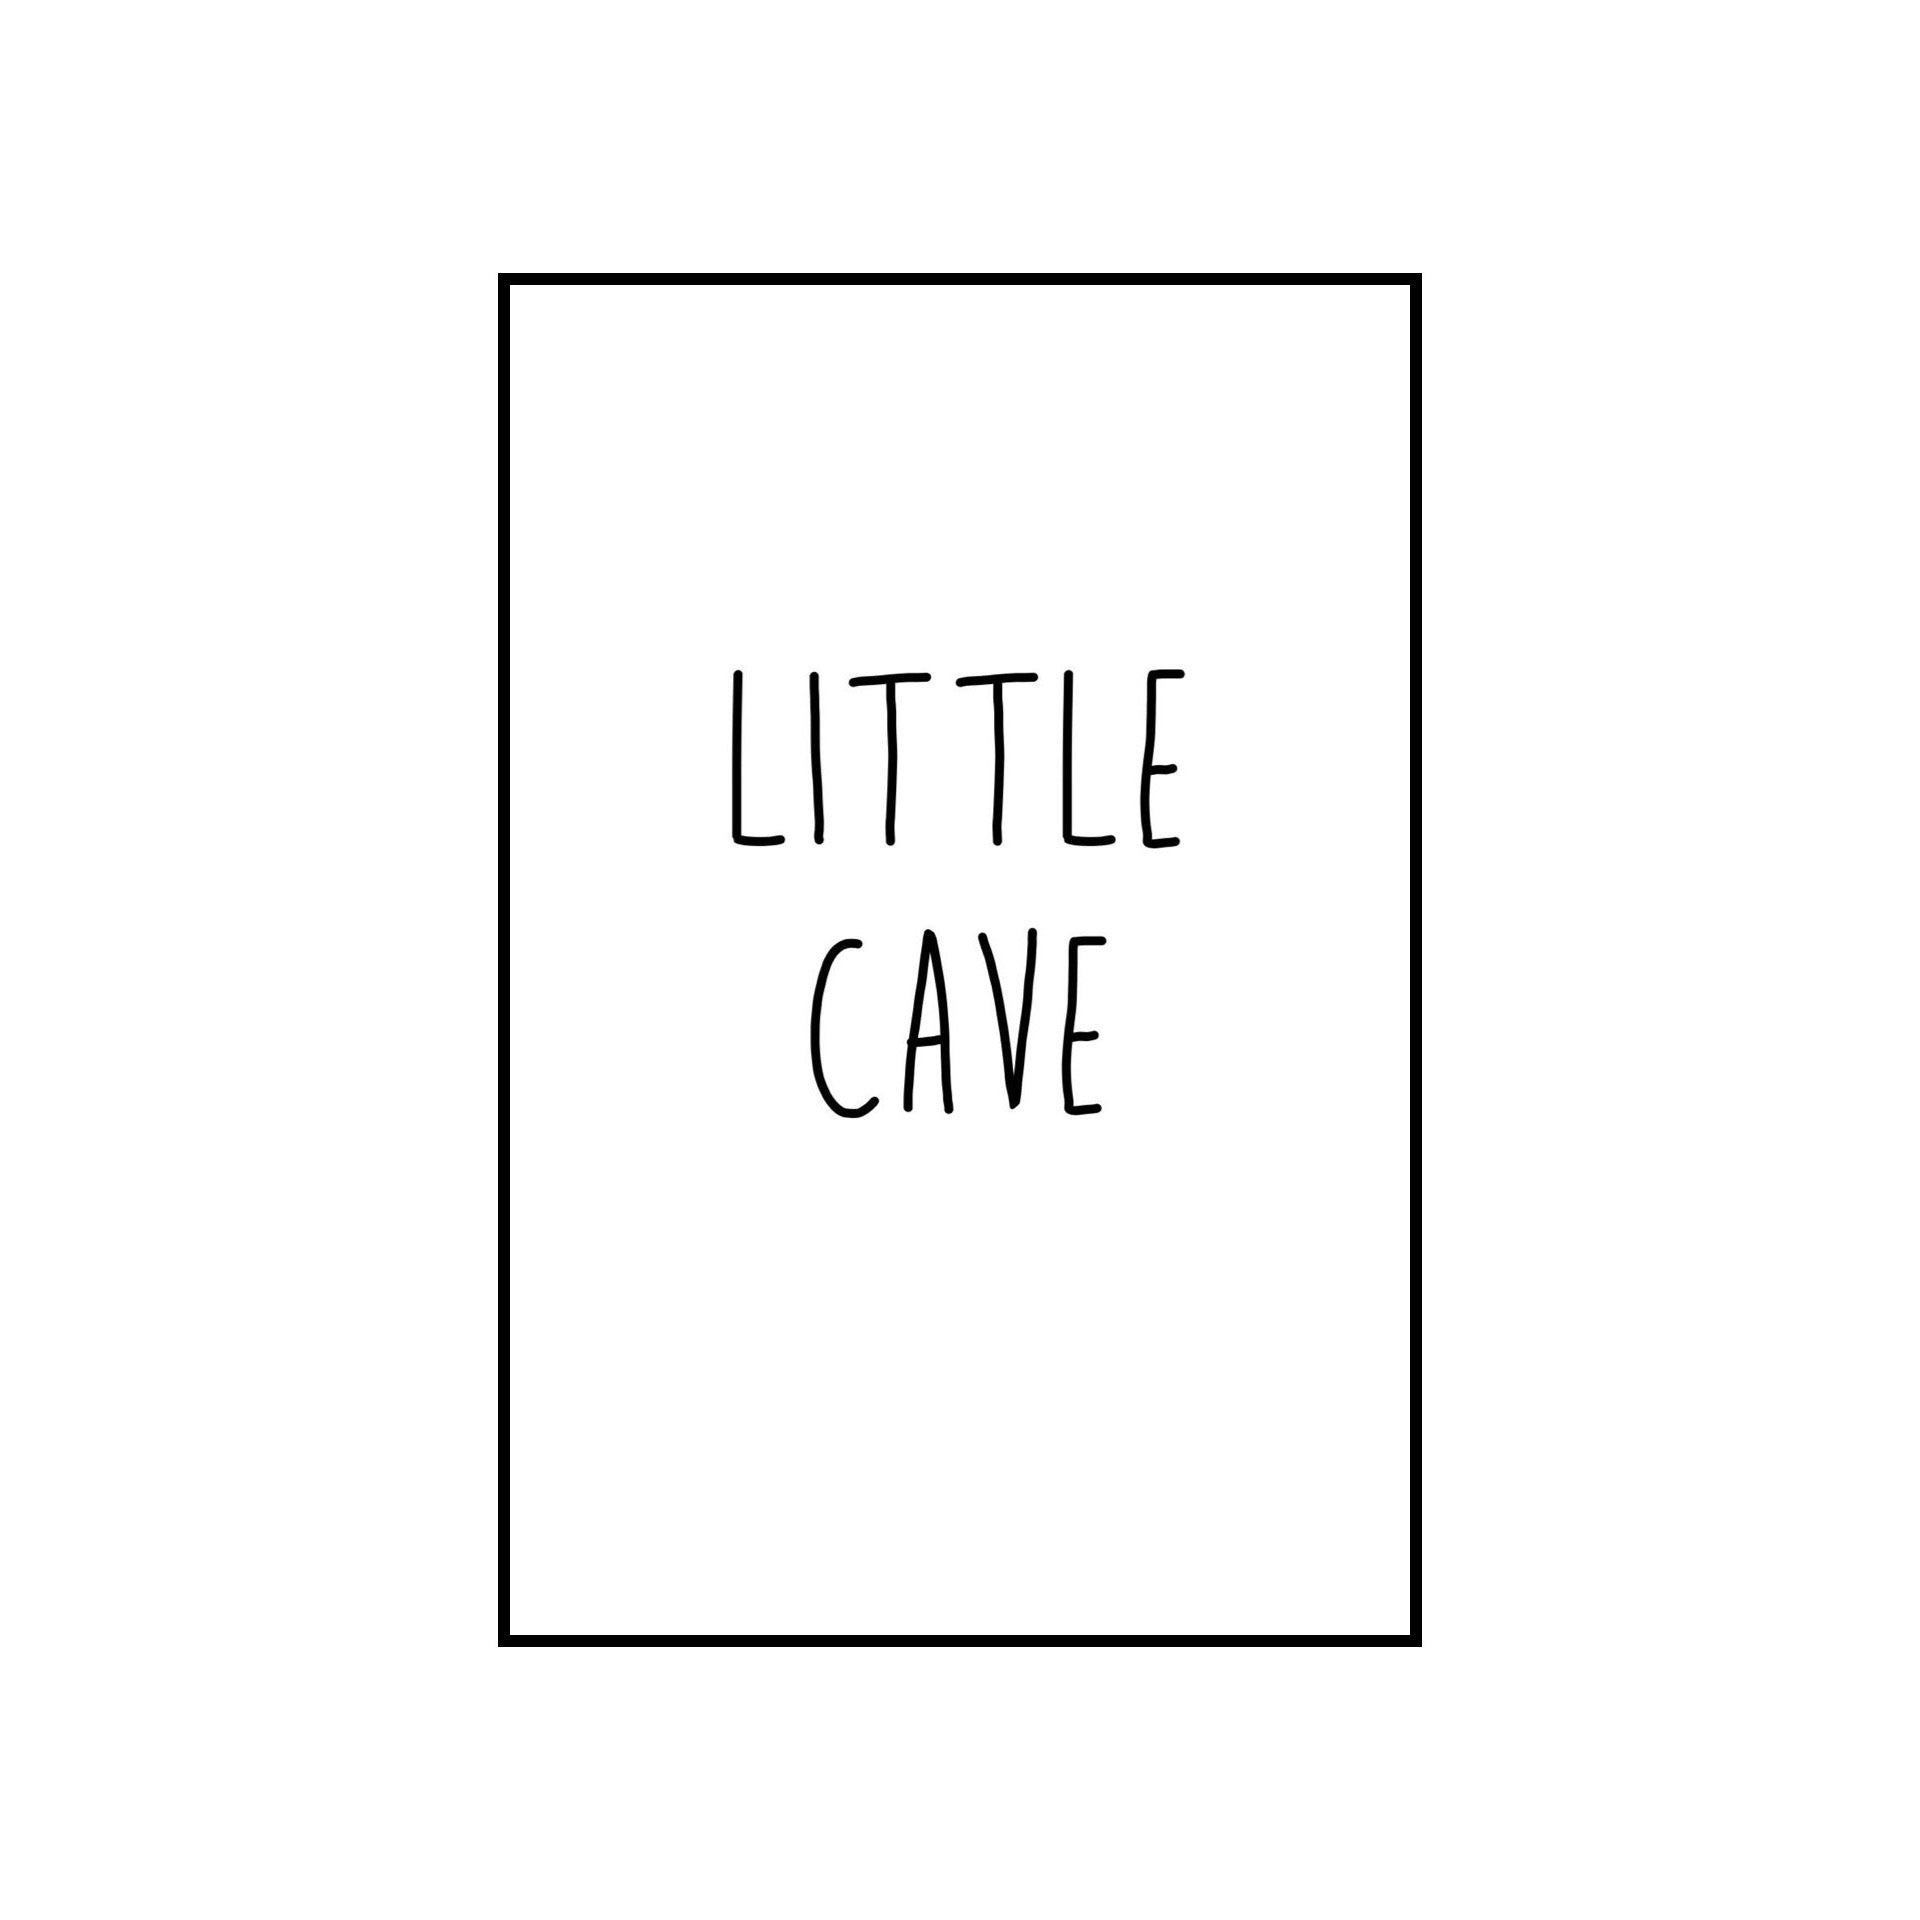 Little cave - THE WALL STYLIST